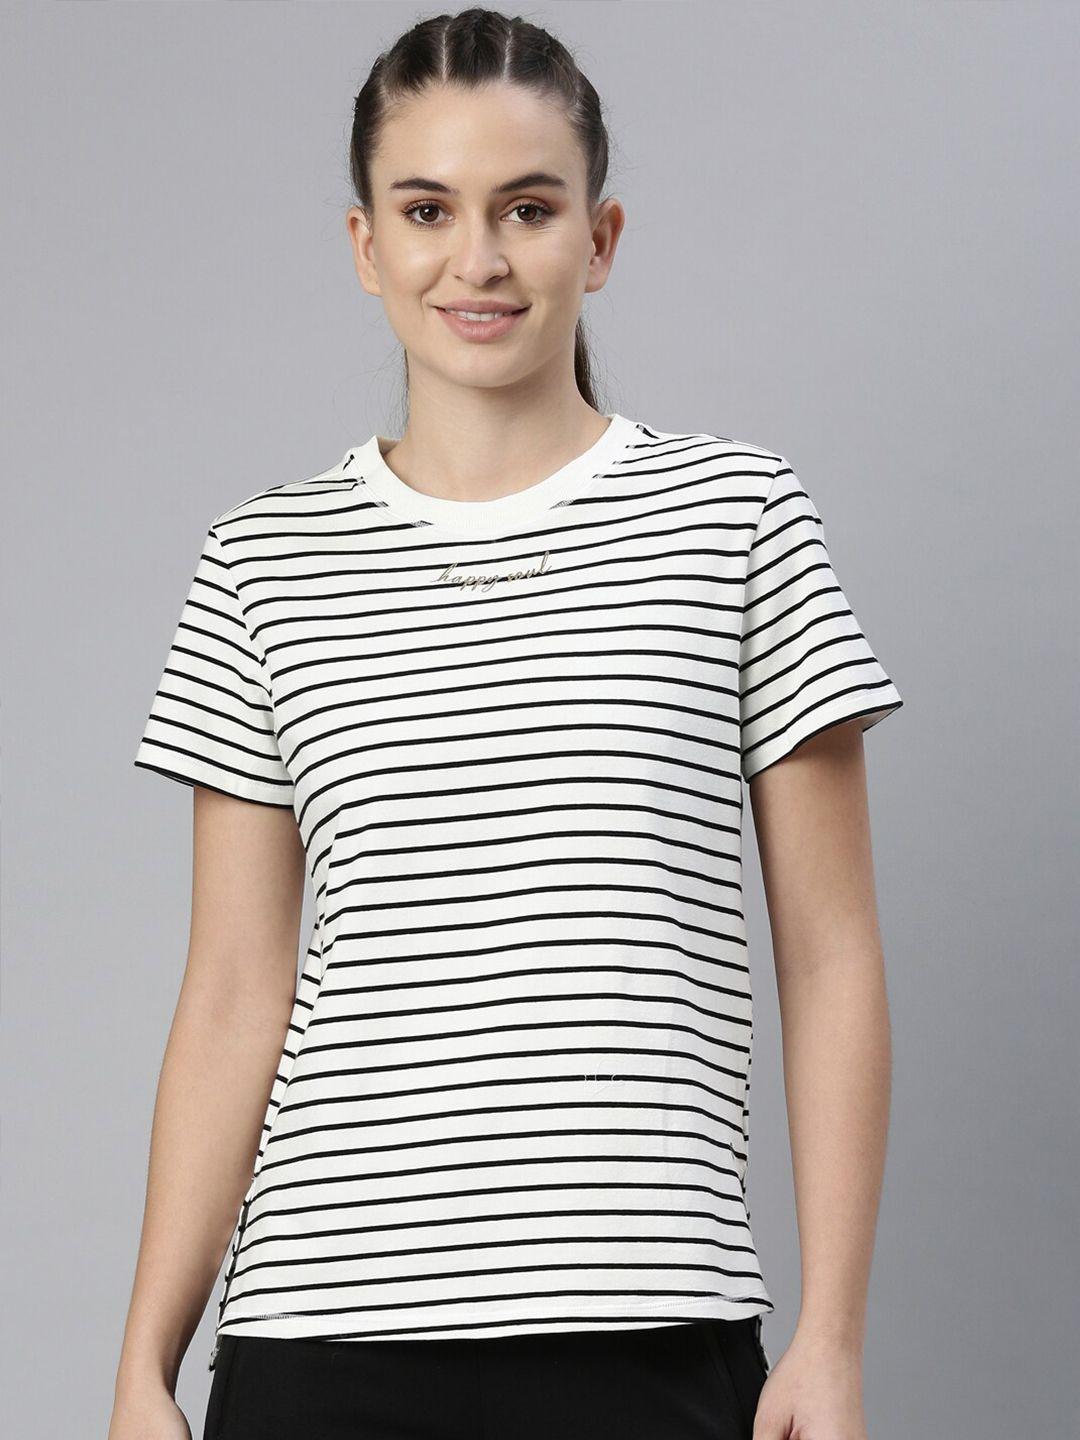 enamor-women-off-white-striped-antimicrobial-cotton-outdoor-t-shirt